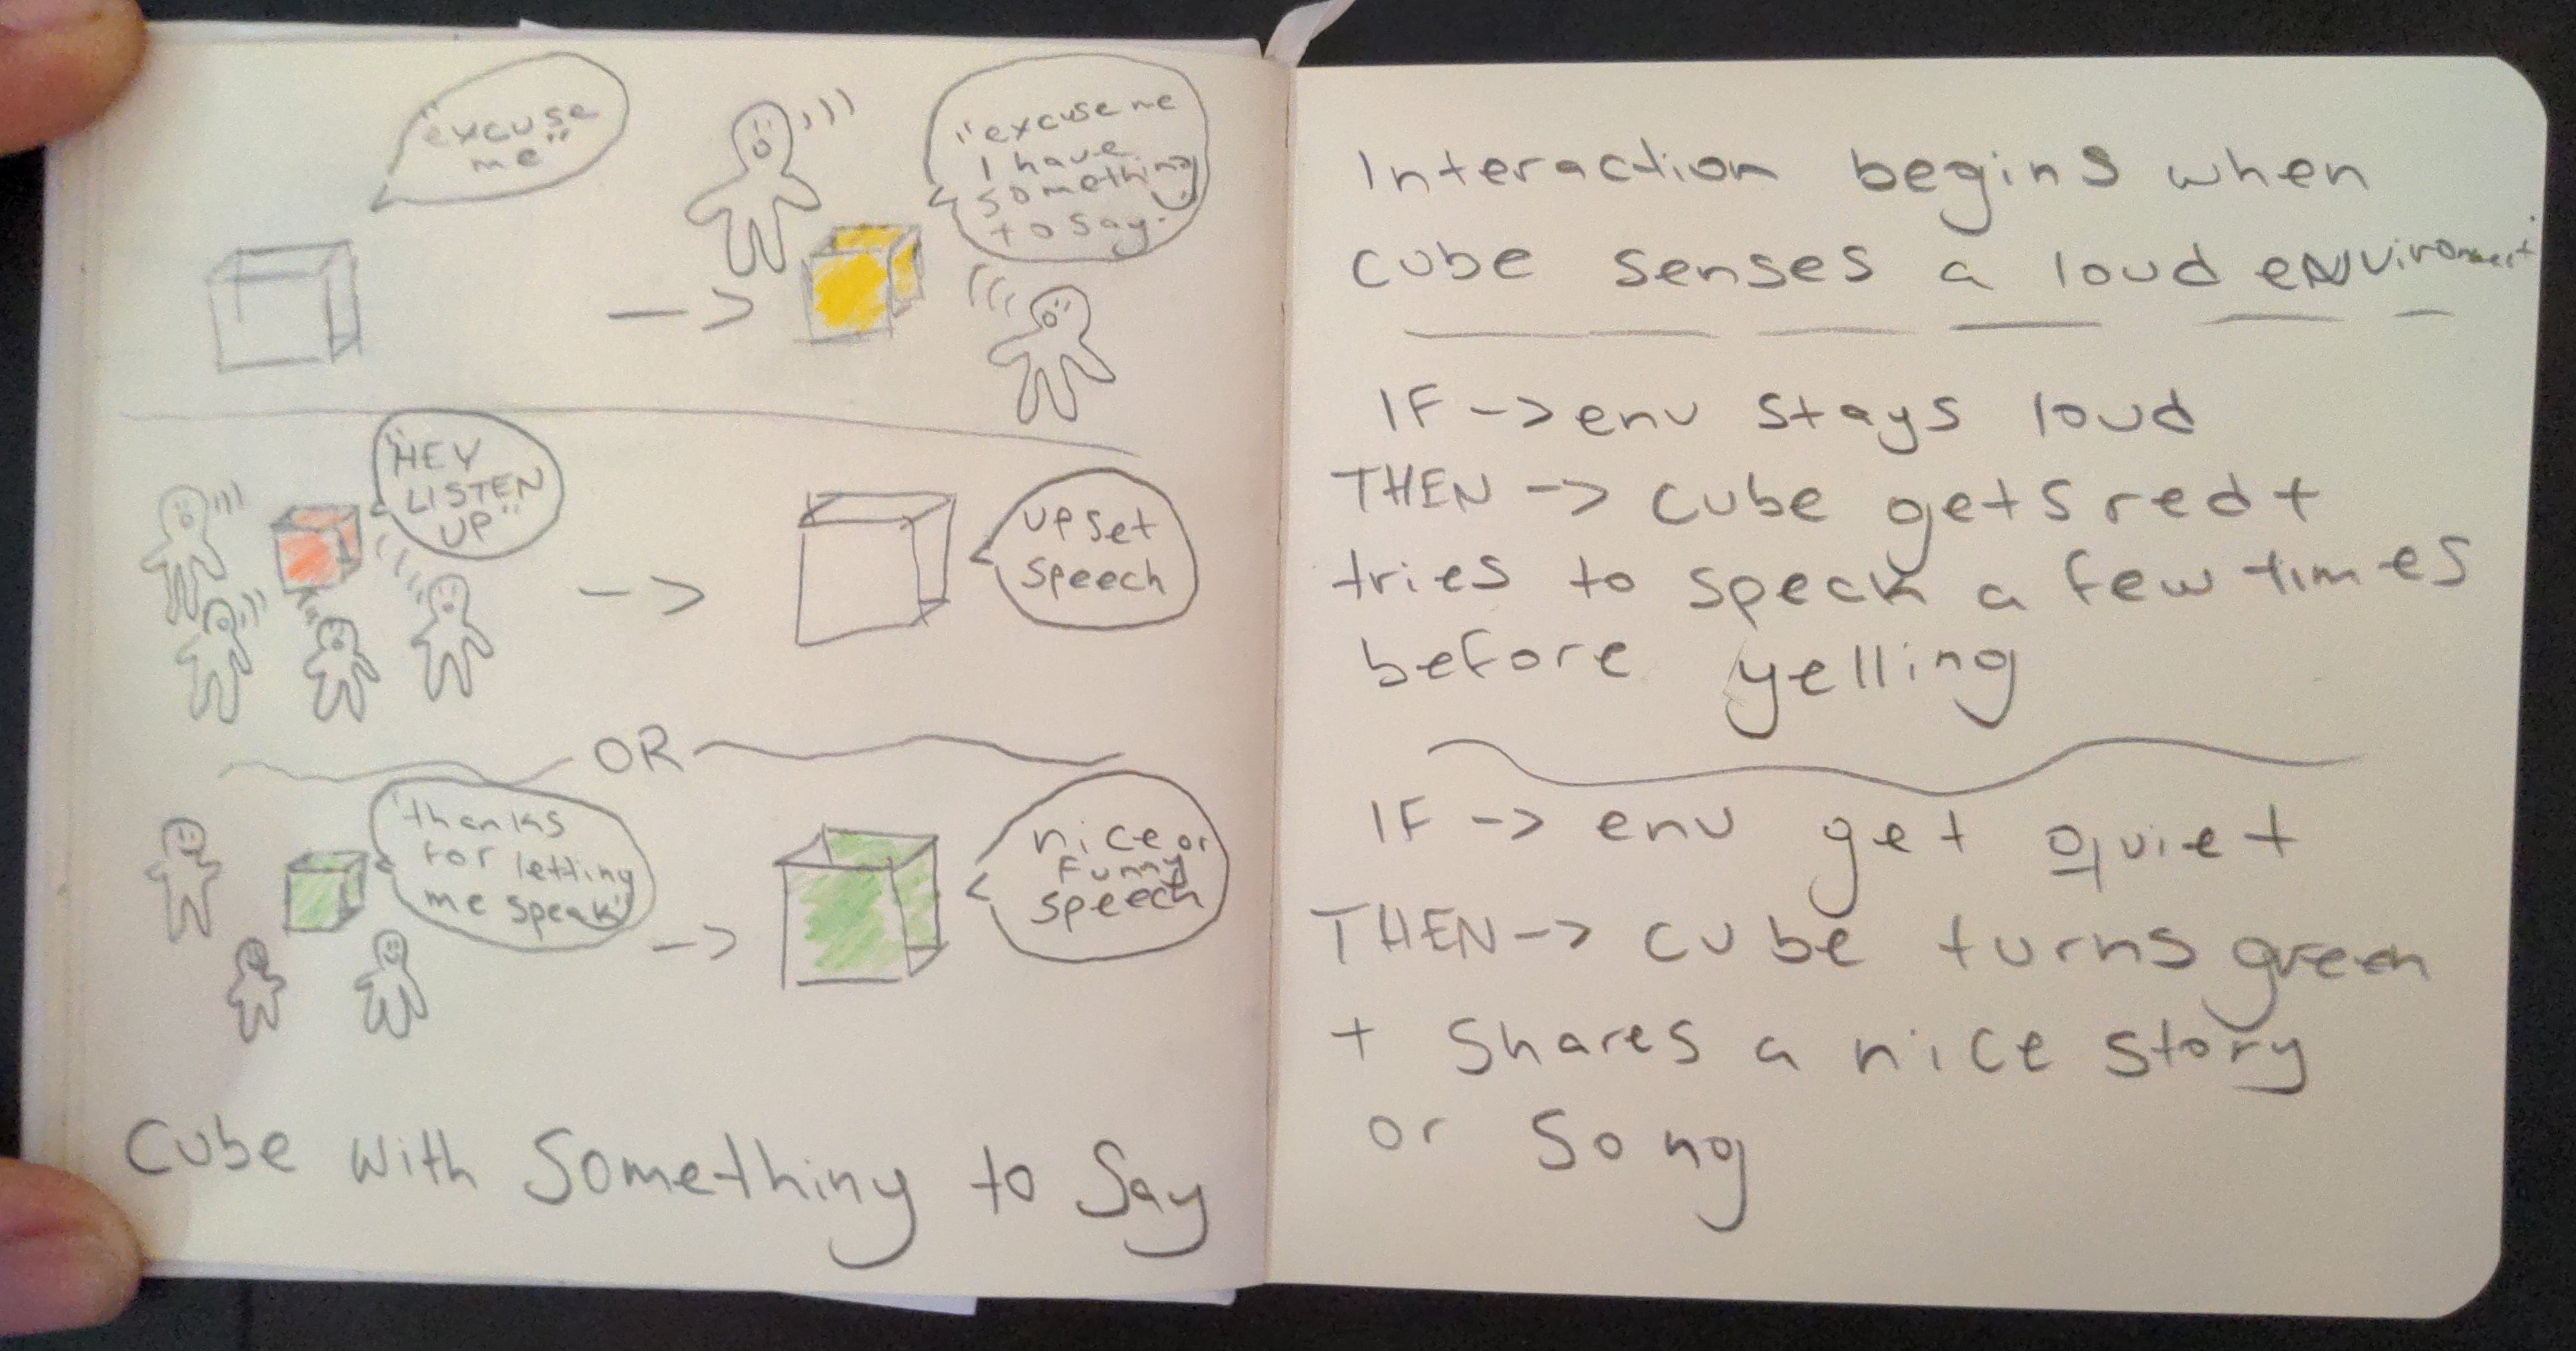 photo of a small sketchbook showing a drawing and notes of a light and color reactive cube which response to audio levels nearby.